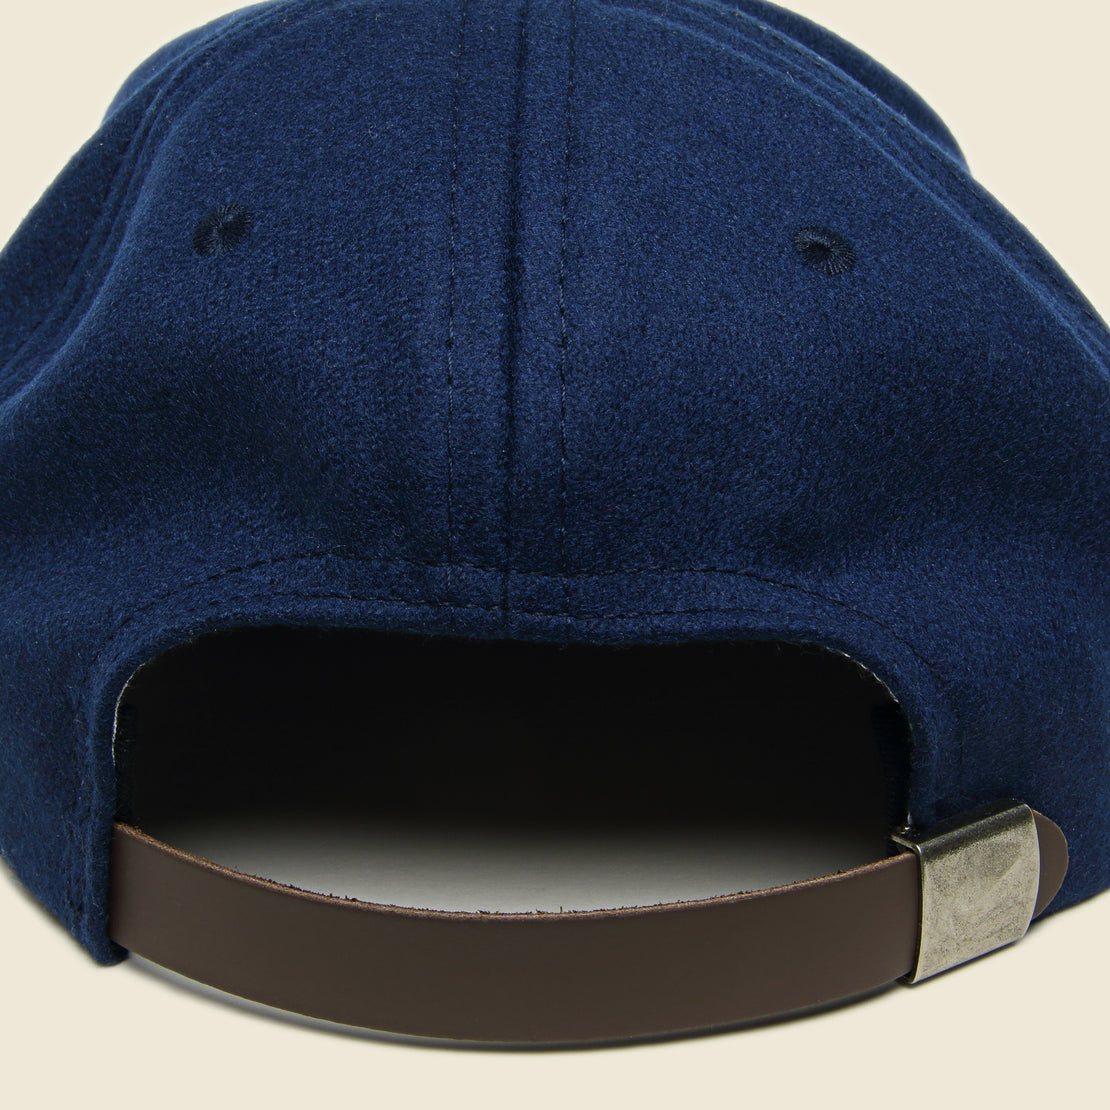 Los Angeles Wool Hat - Navy - Ebbets Field Flannels - STAG Provisions - Accessories - Hats